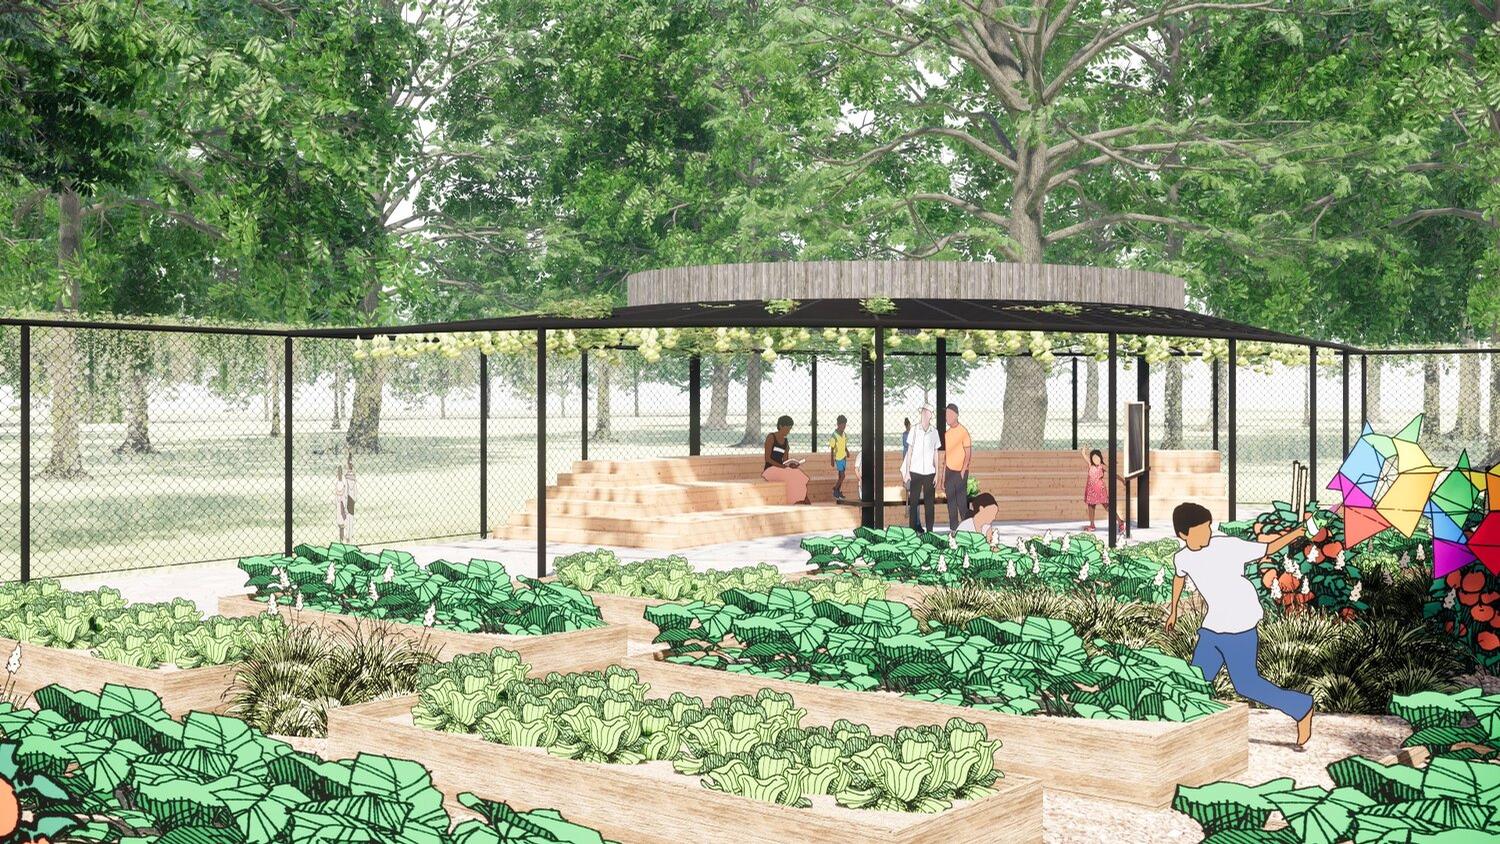 The vegetable gardens will feature 150 varieties of fresh produce, herbs and edible flowers over three seasons each year